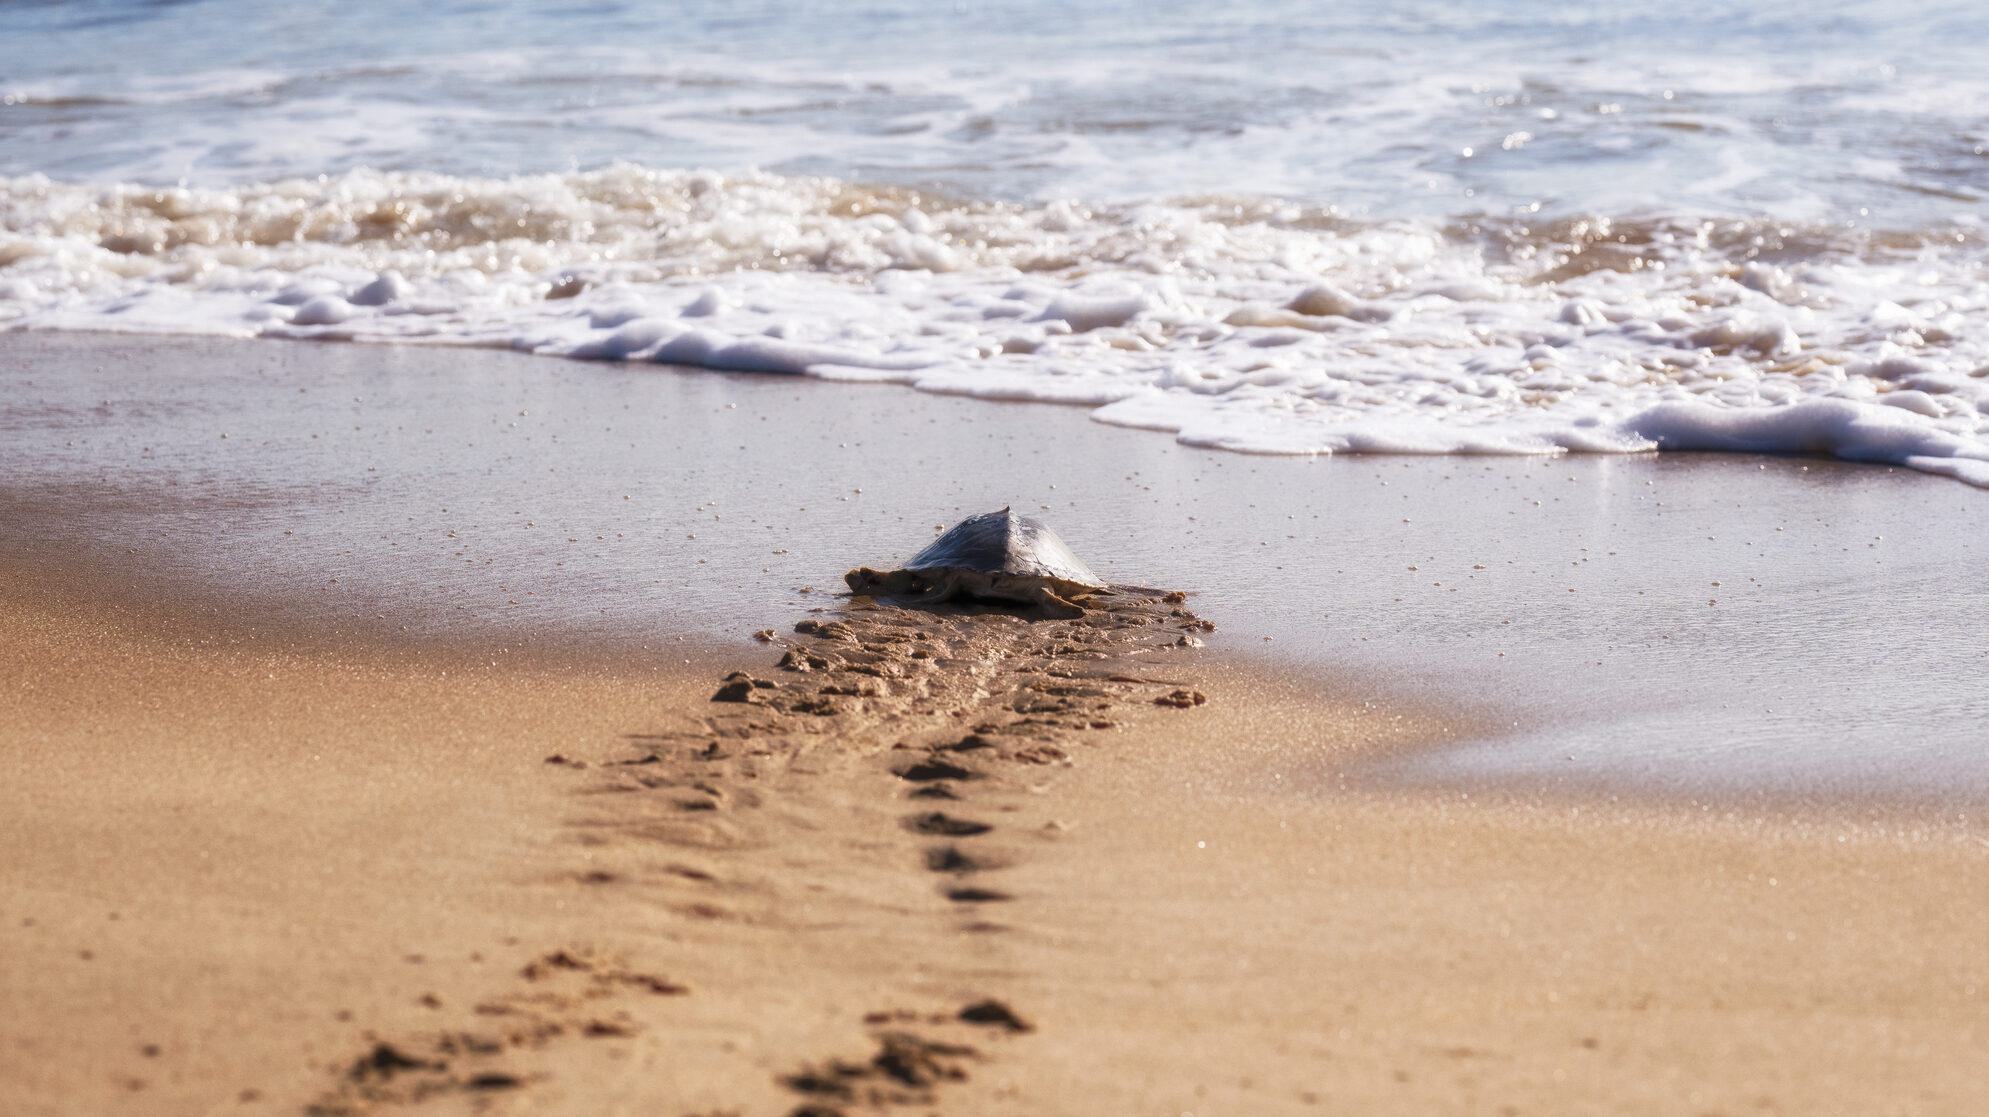 A sea turtle moves towards the ocean waves, leaving tracks on the sand at the beach.